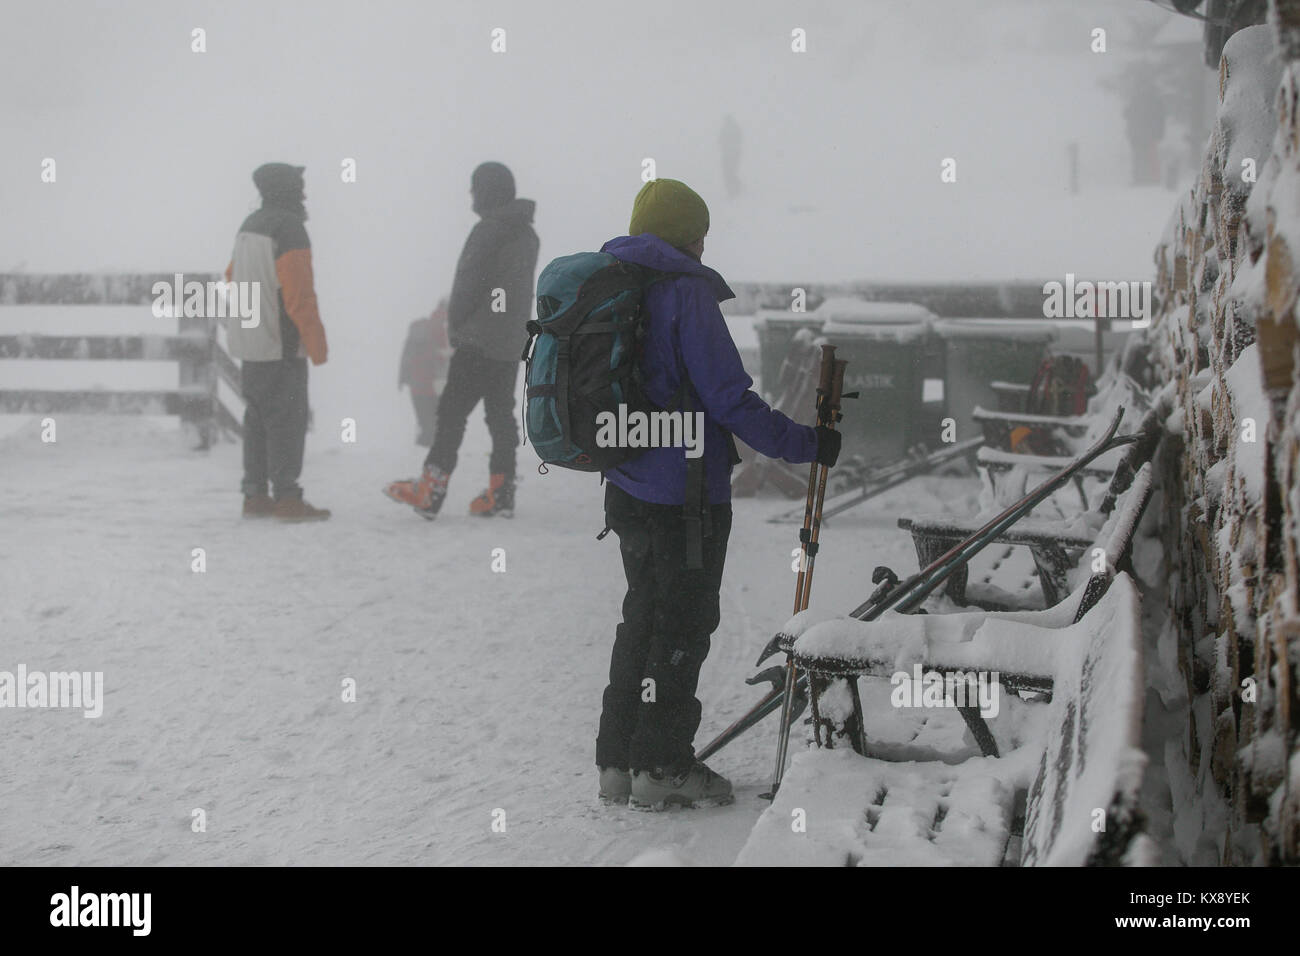 Skiers snowboarders and hikers arriving at covered in snow and mist summit of Skrzyczne mountain in Szczyrk heading for the slopes and hiking trails Stock Photo